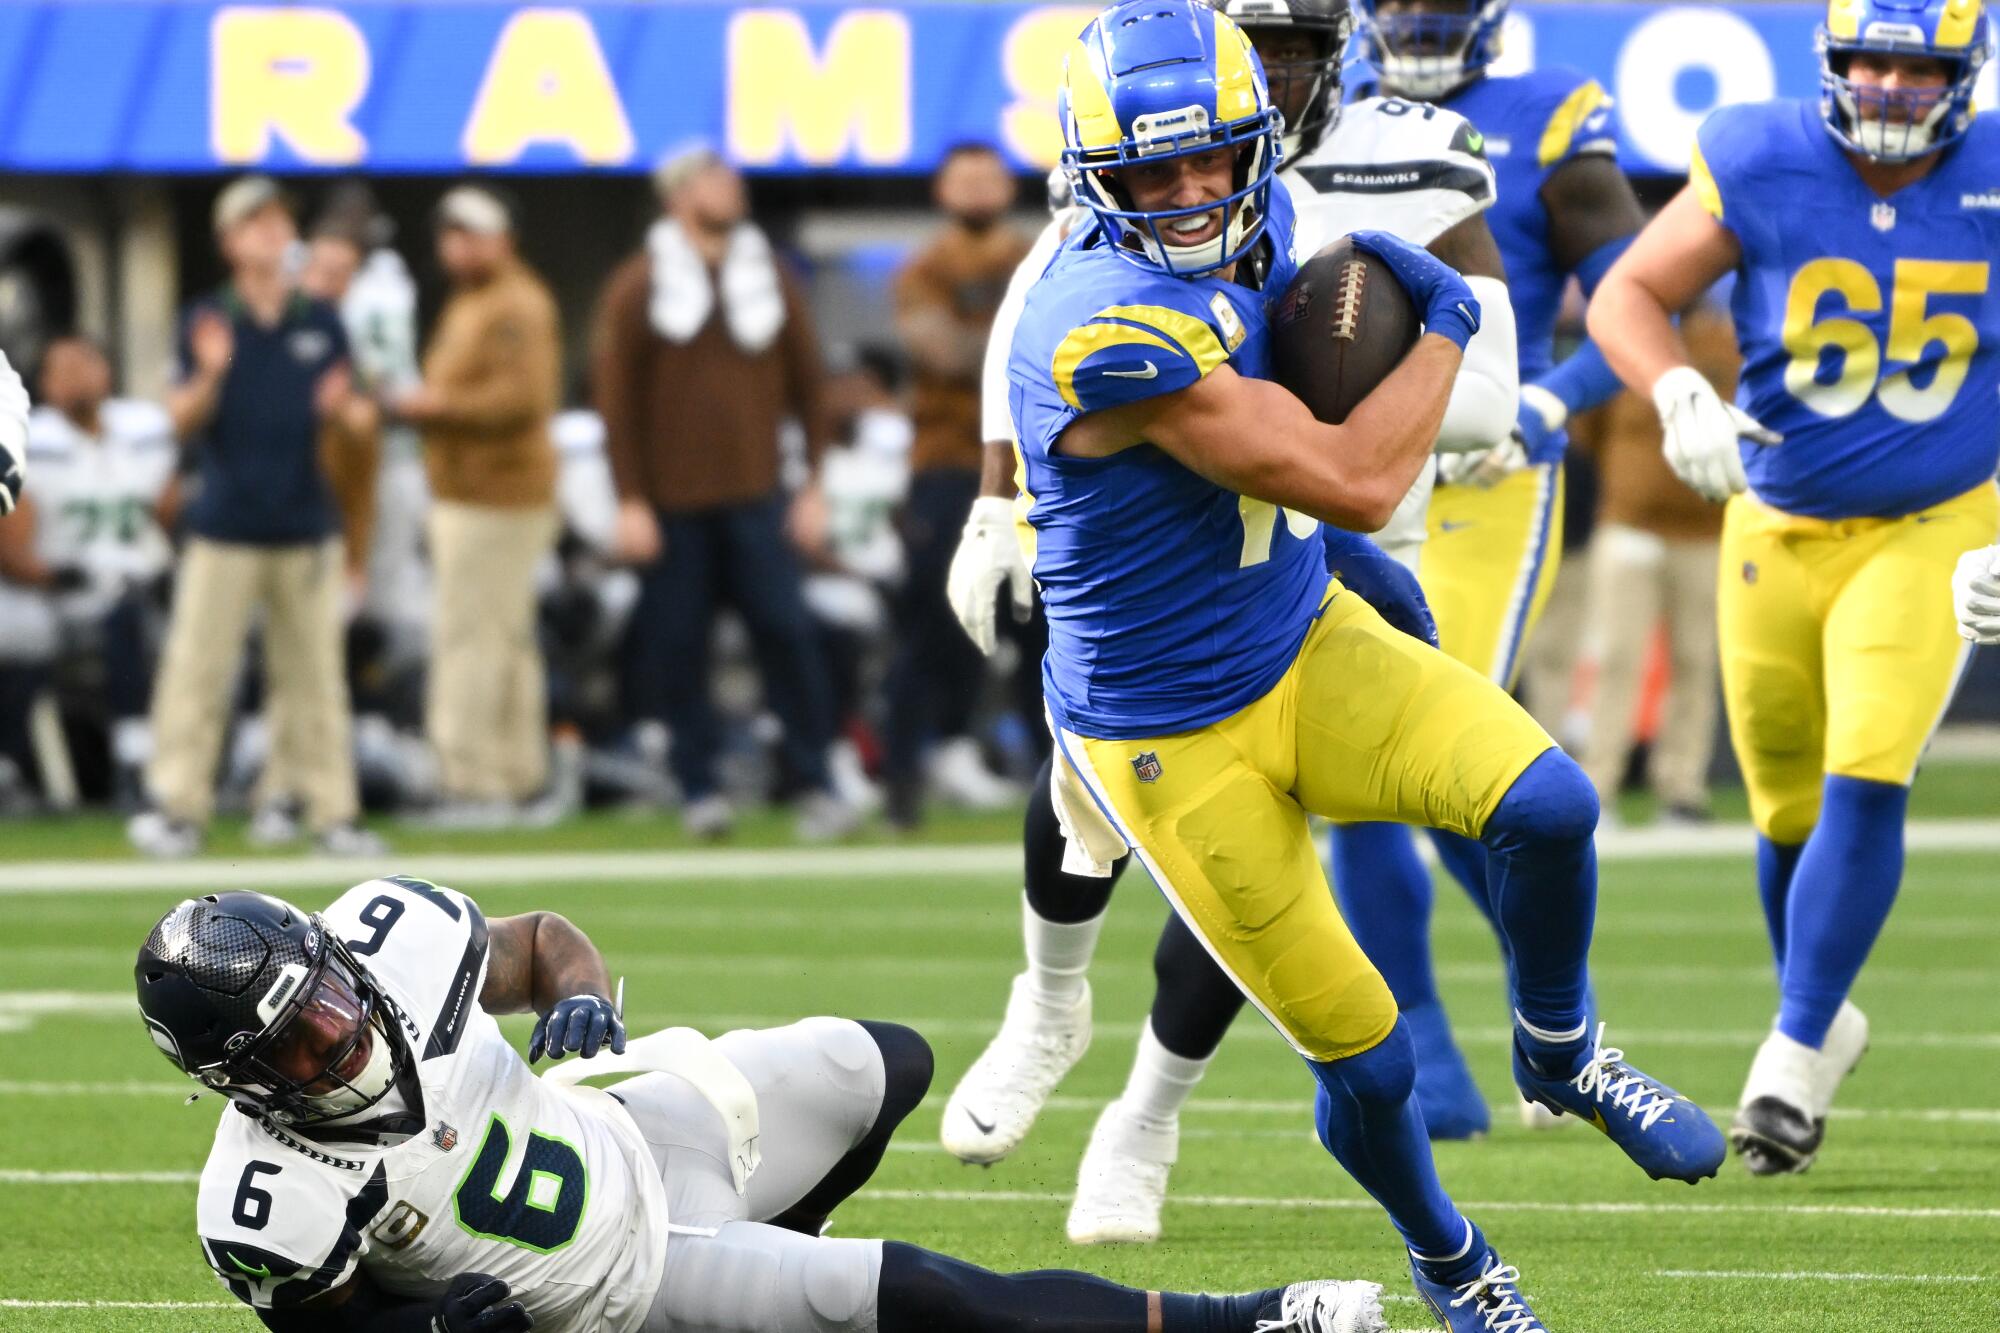 Rams wide receiver Cooper Kupp catches a short pass against the Seattle Seahawks at SoFi Stadium.